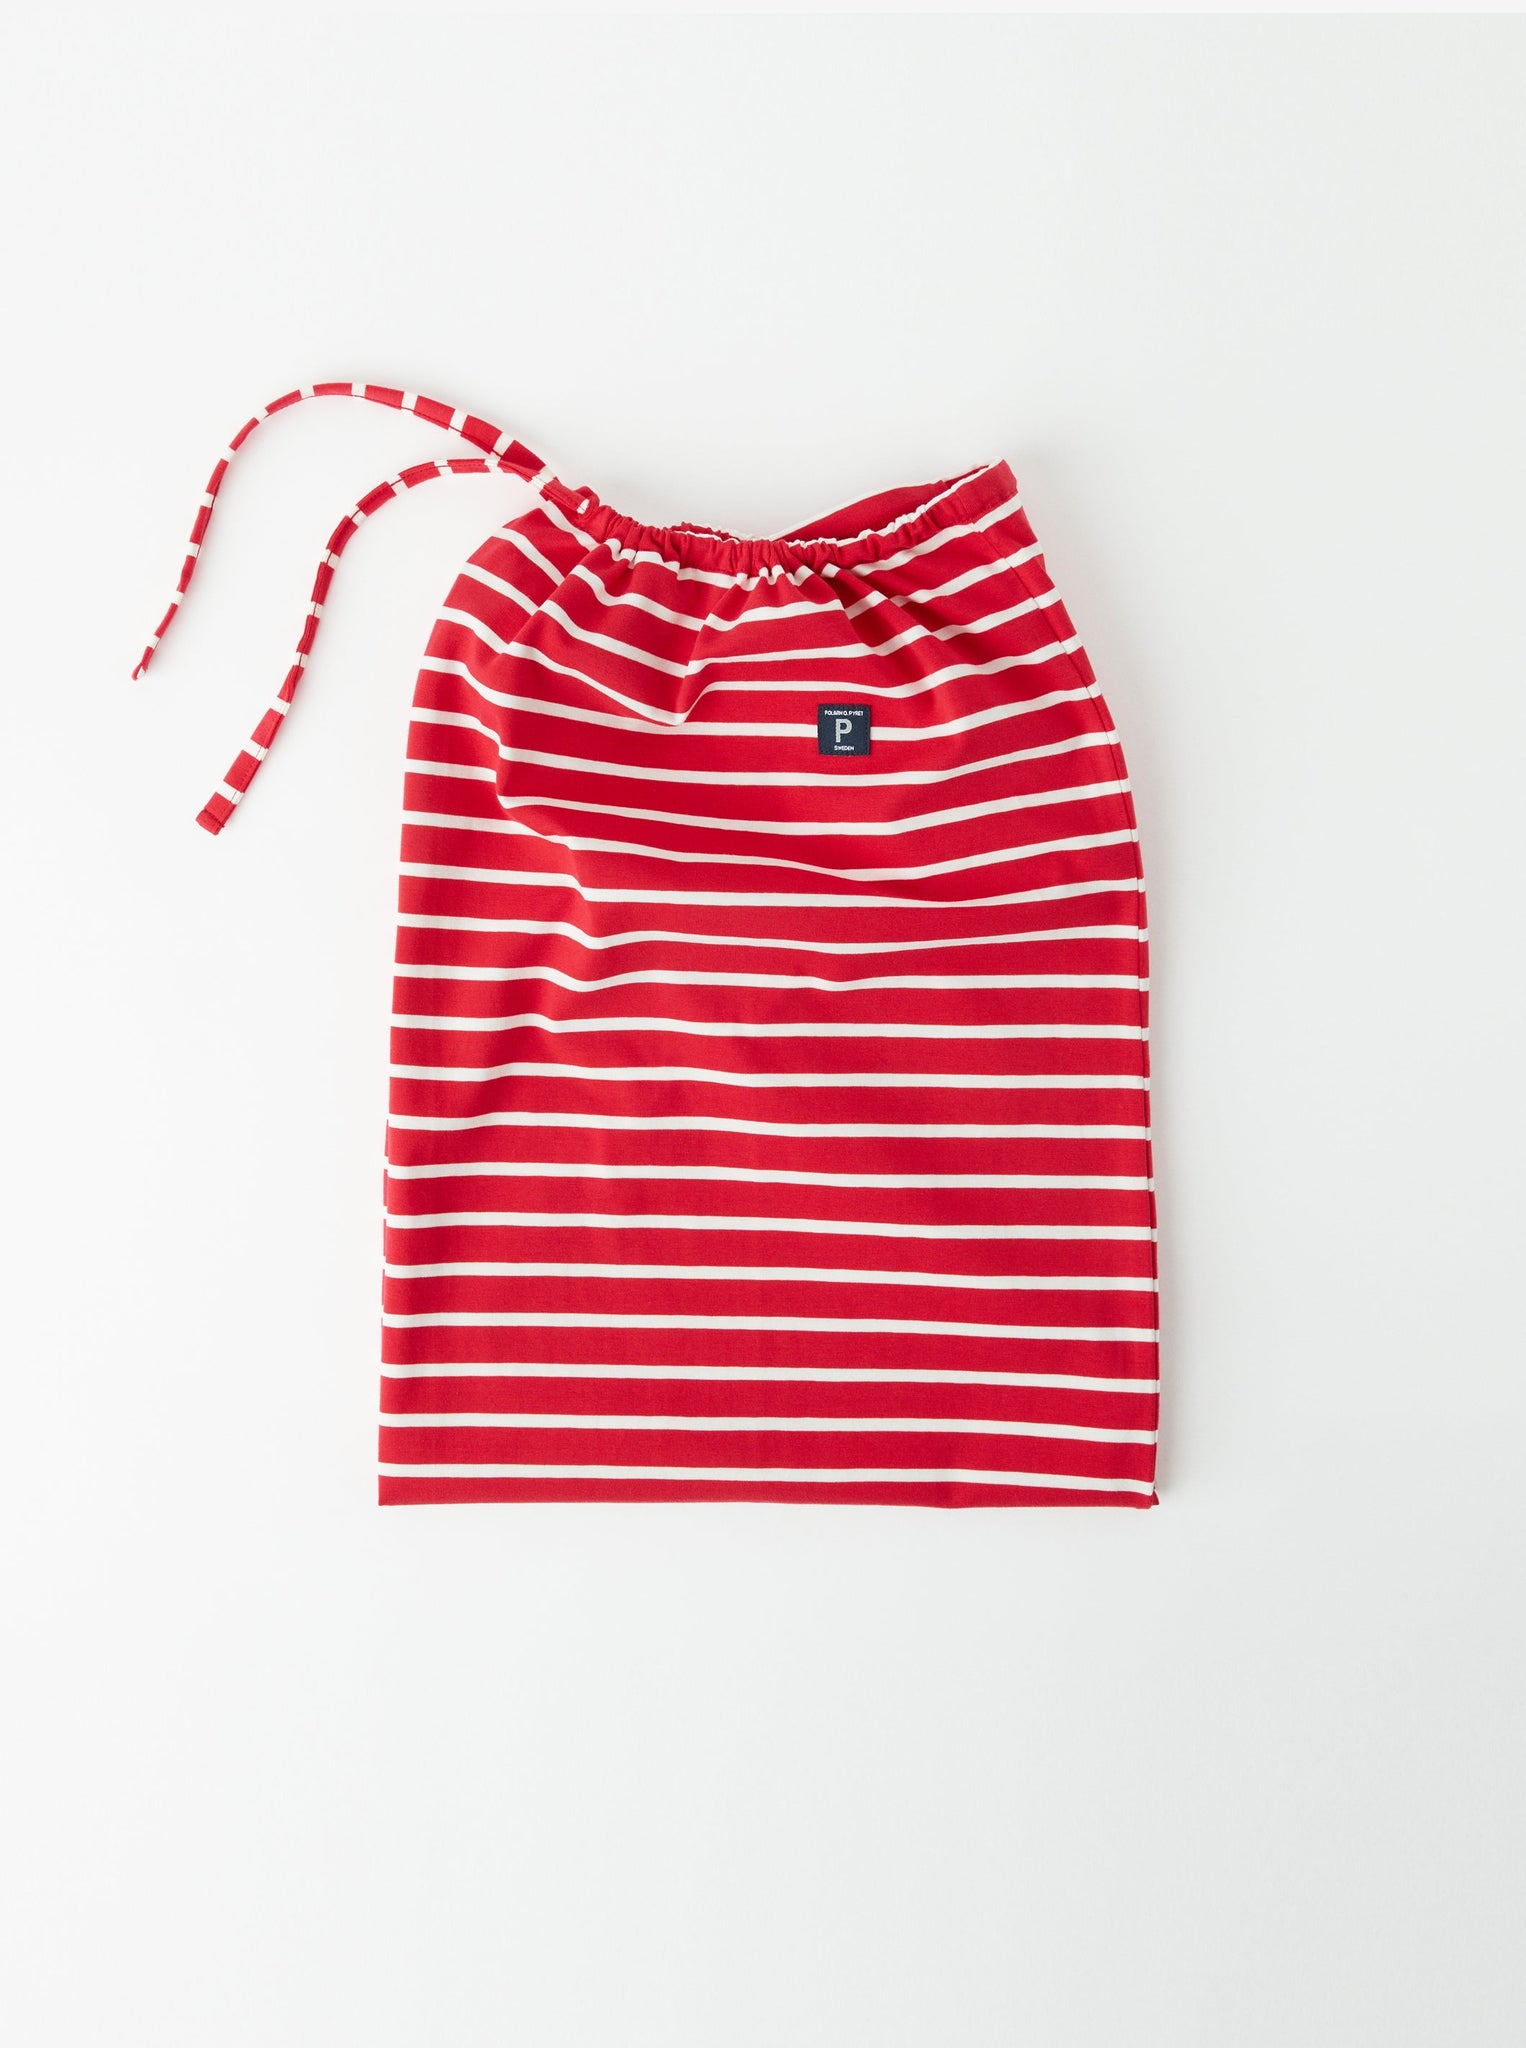 Red Christmas Present Sack from the Polarn O. Pyret kidswear collection. Made using ethically sourced materials